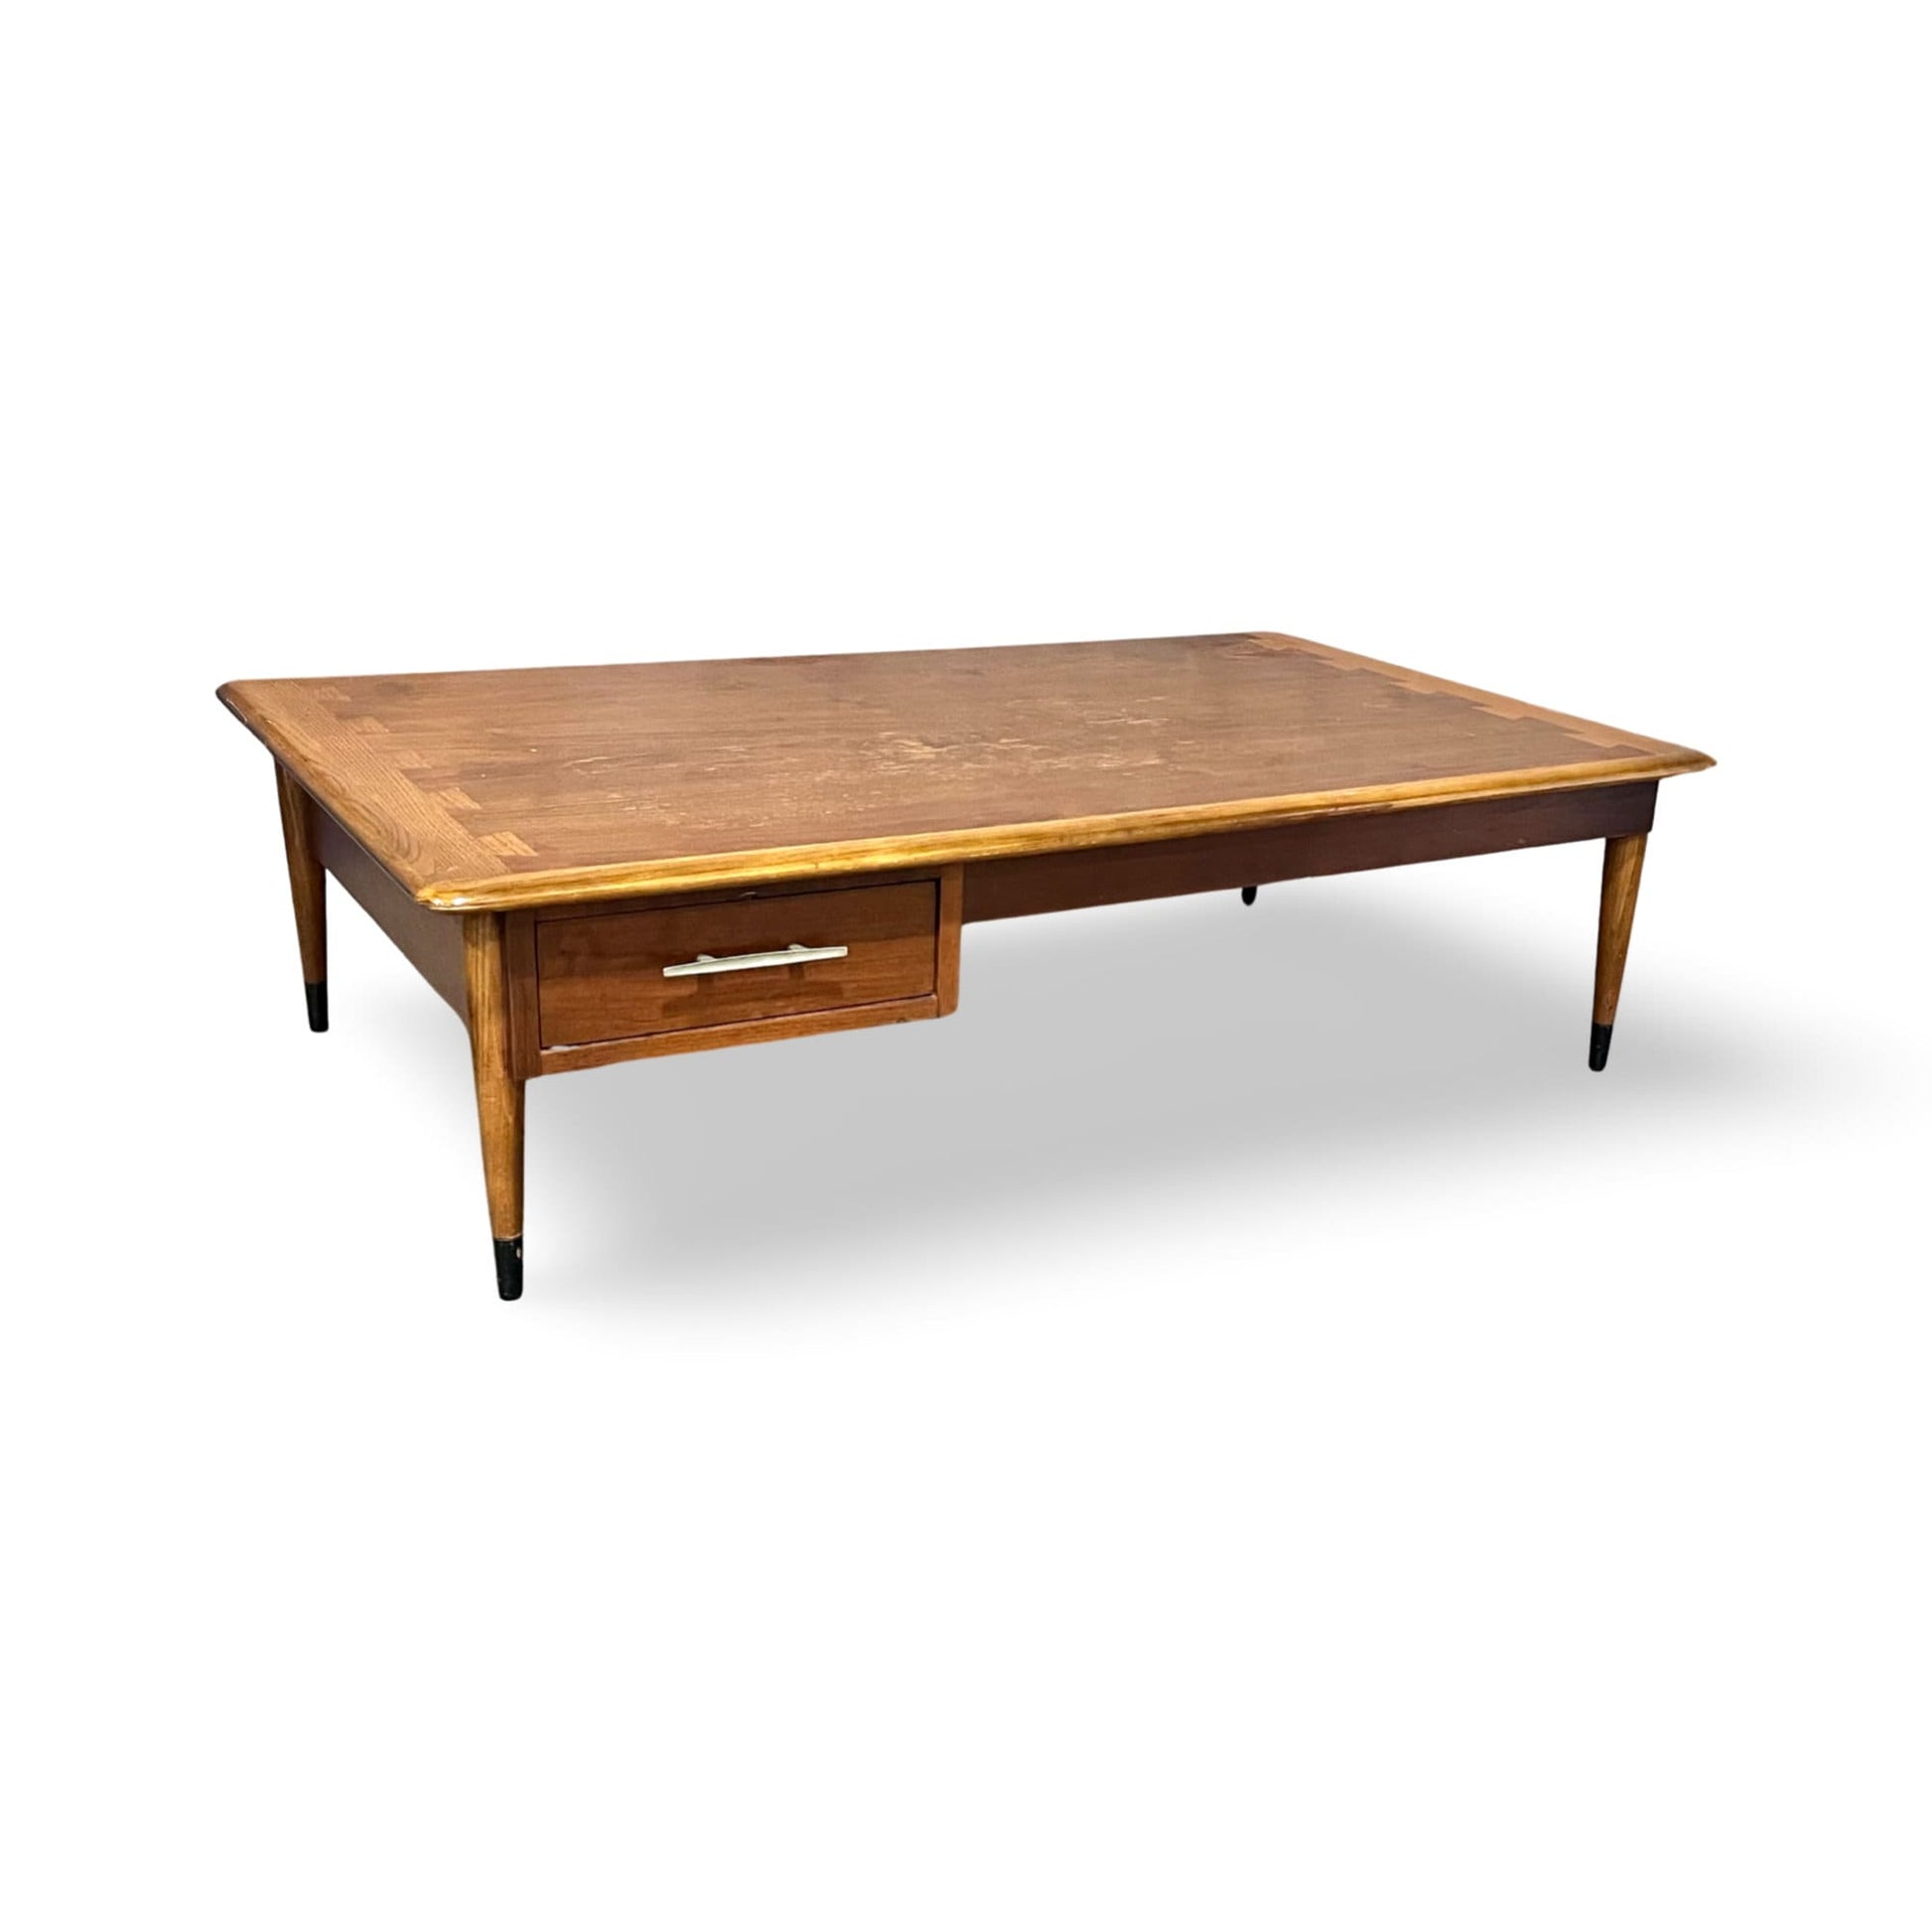 Mid-century Modern Lane coffee table, ideal for classic and contemporary decors.